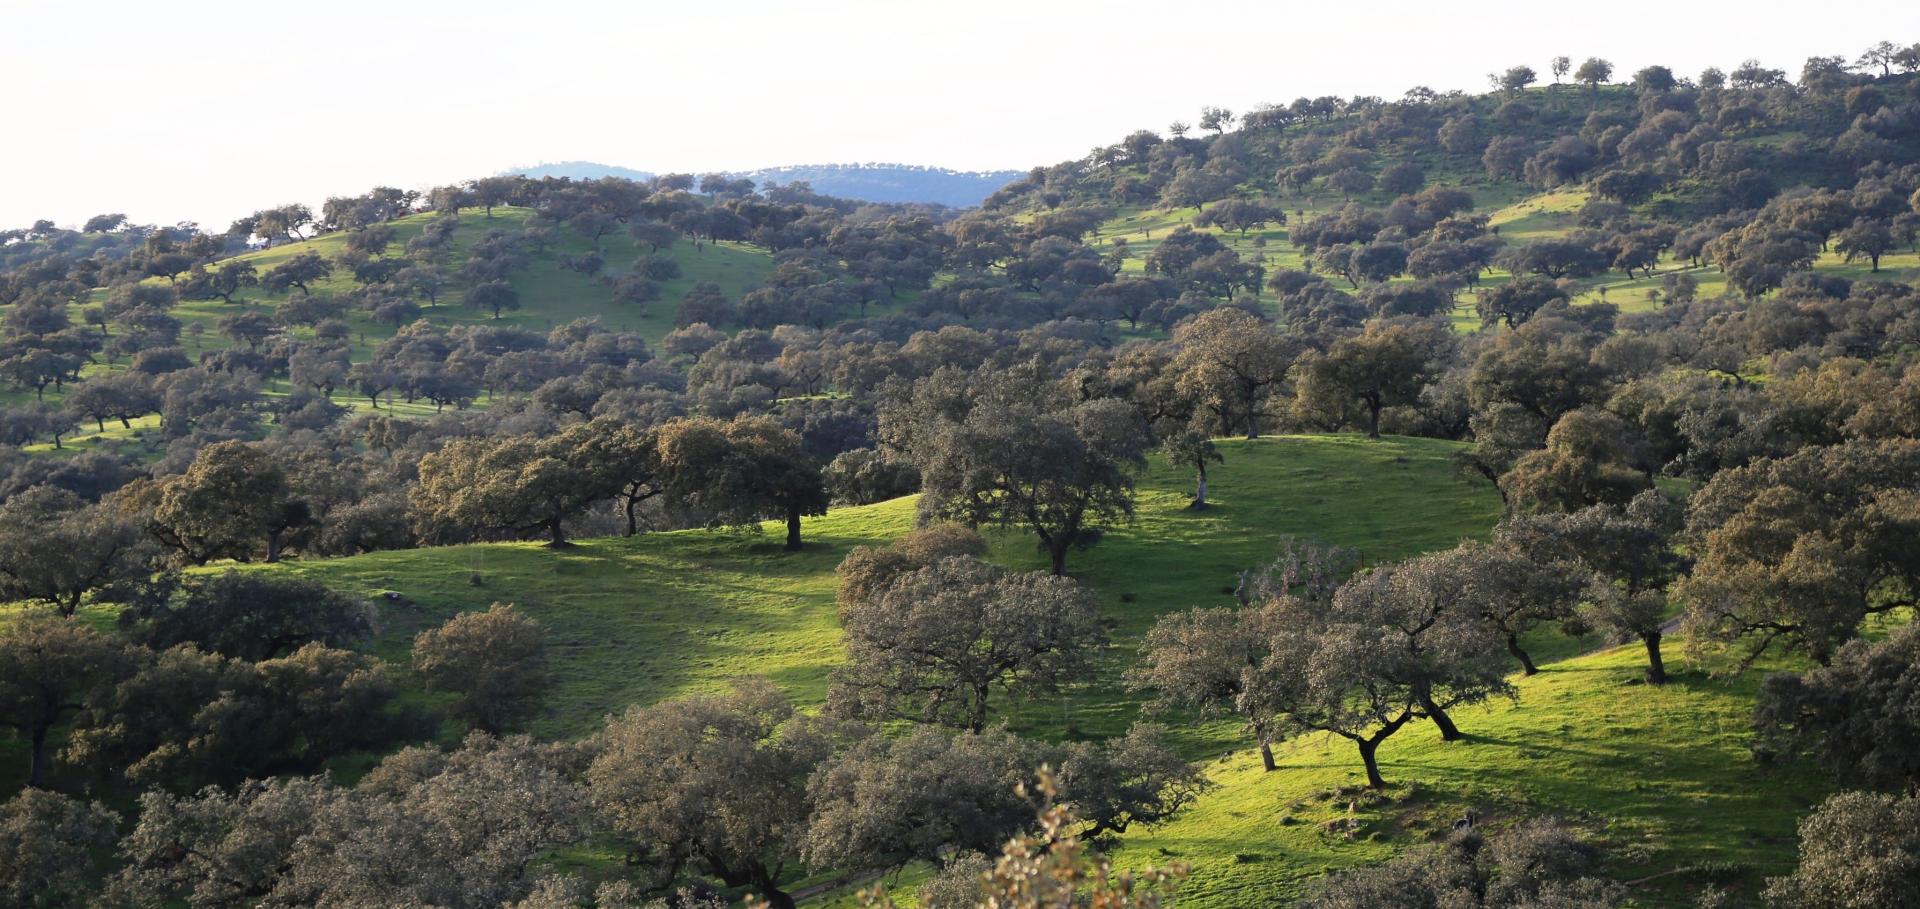 A view of the Dehesa wood: a symbiosis of trees, grasses, livestock and people